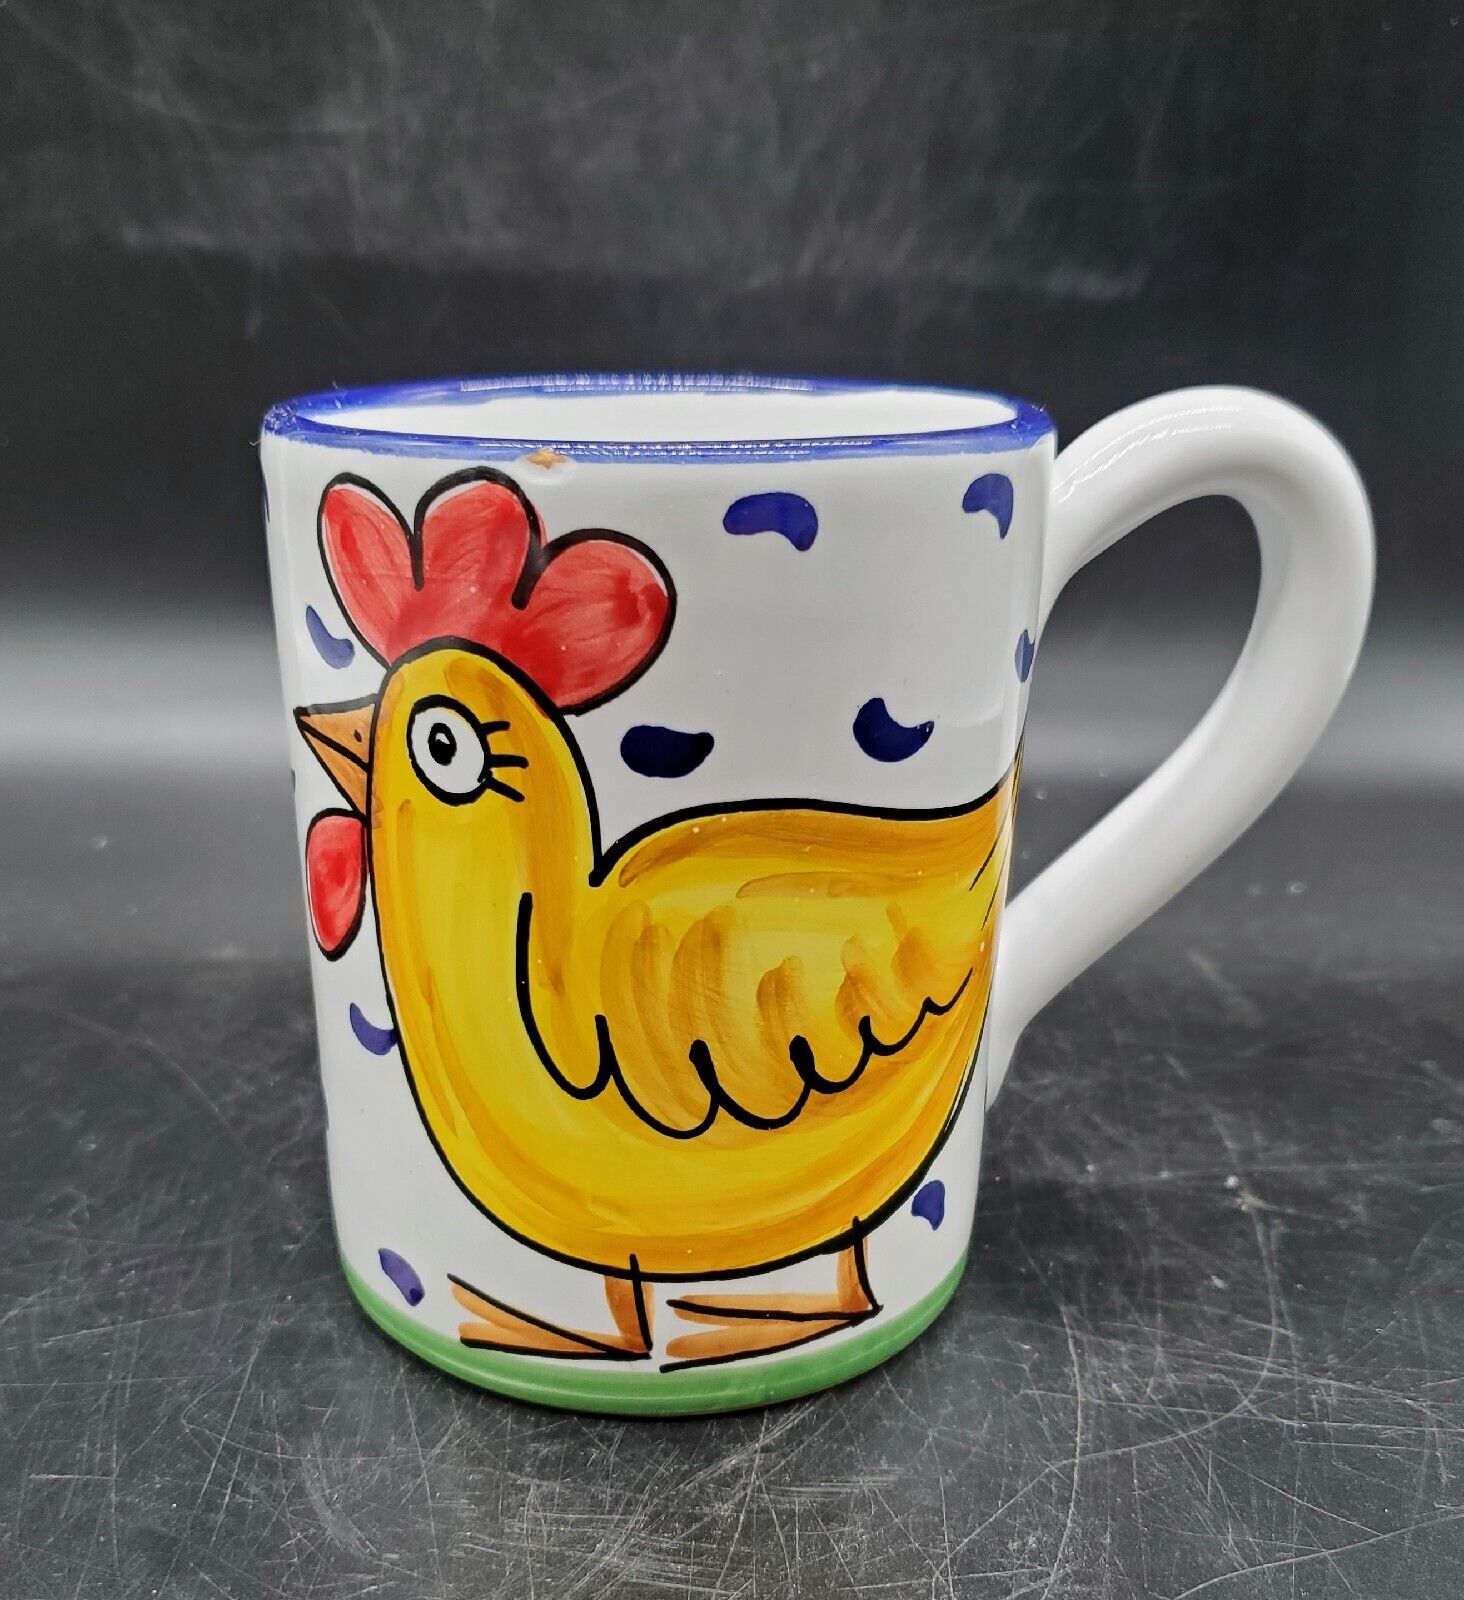 Vintage Whimsical Deruta Ceramic Coffee Mug Cup Chicken Rooster Italy Pottery 